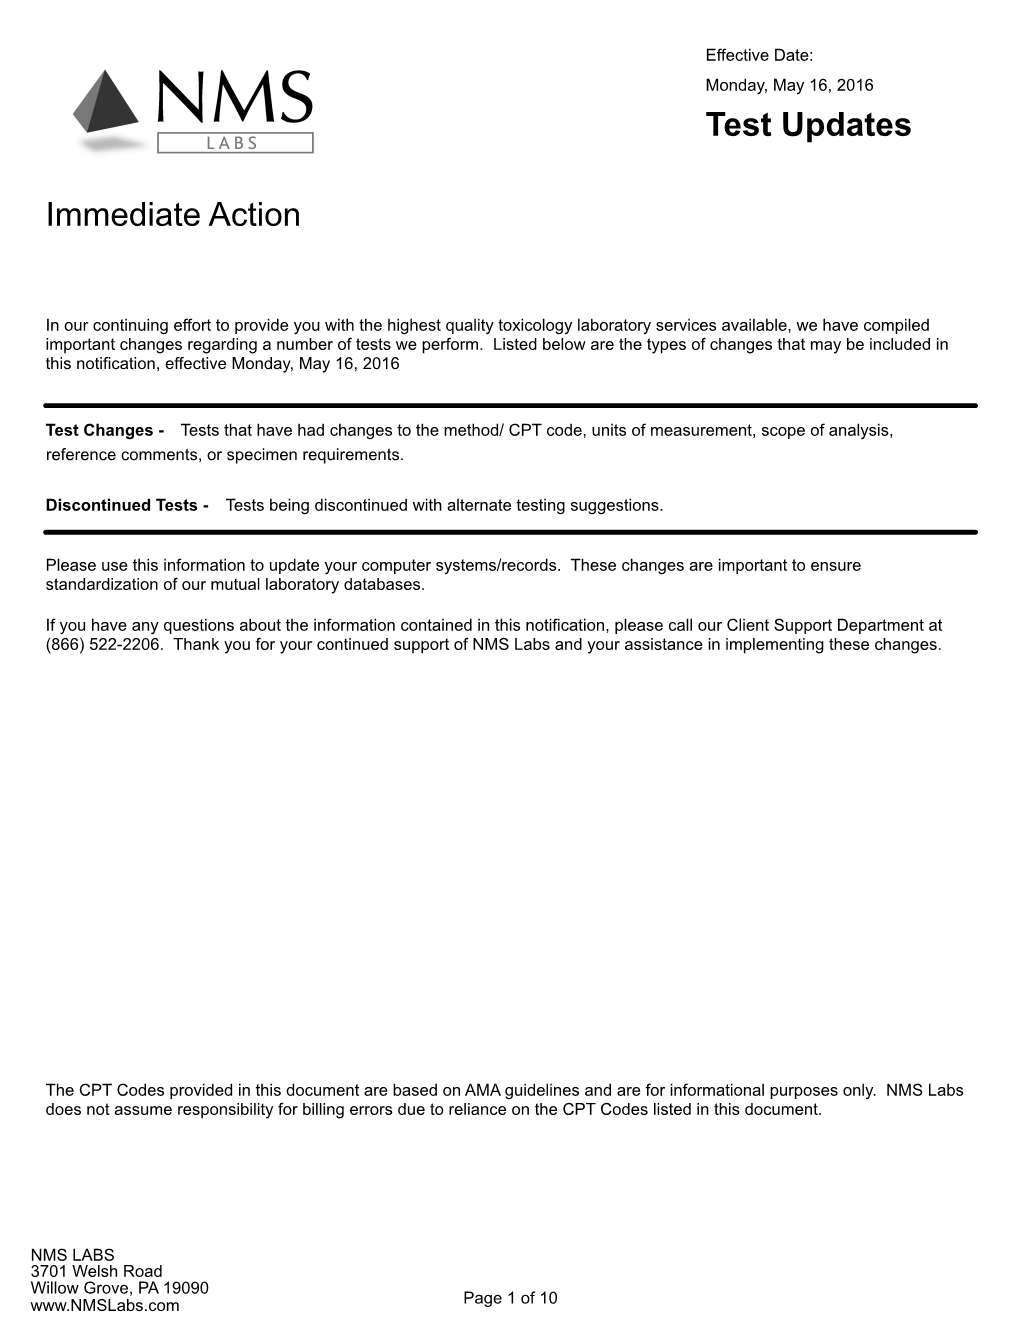 Test Update Immediate Action Notification, Effective May 16, 2016